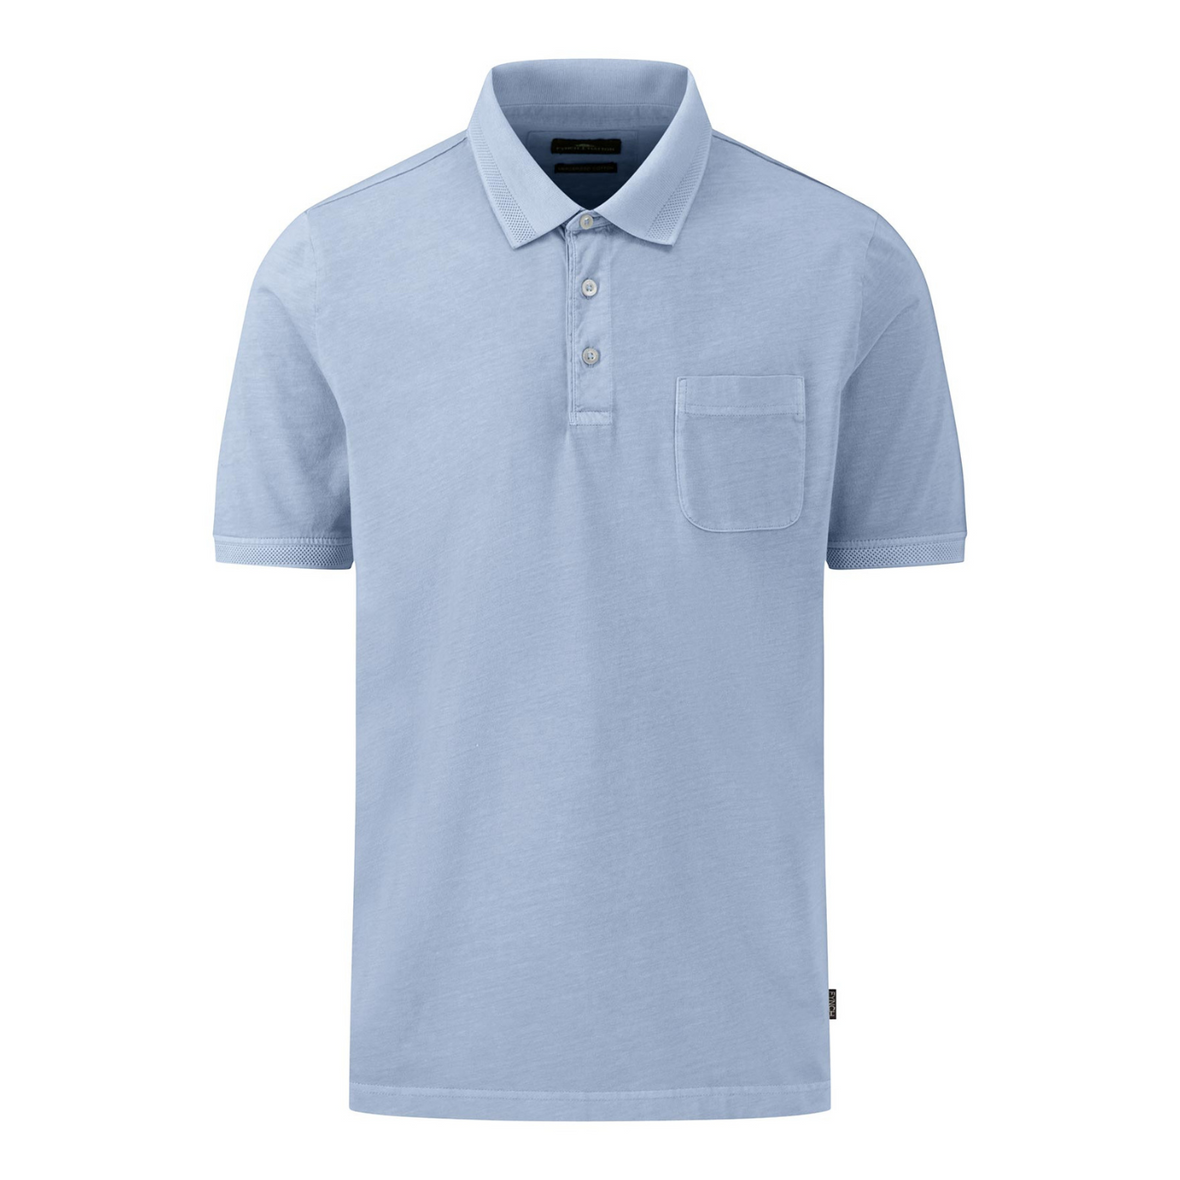 Front view of the Fynch Hatton Polo shirt in Summer Breeze